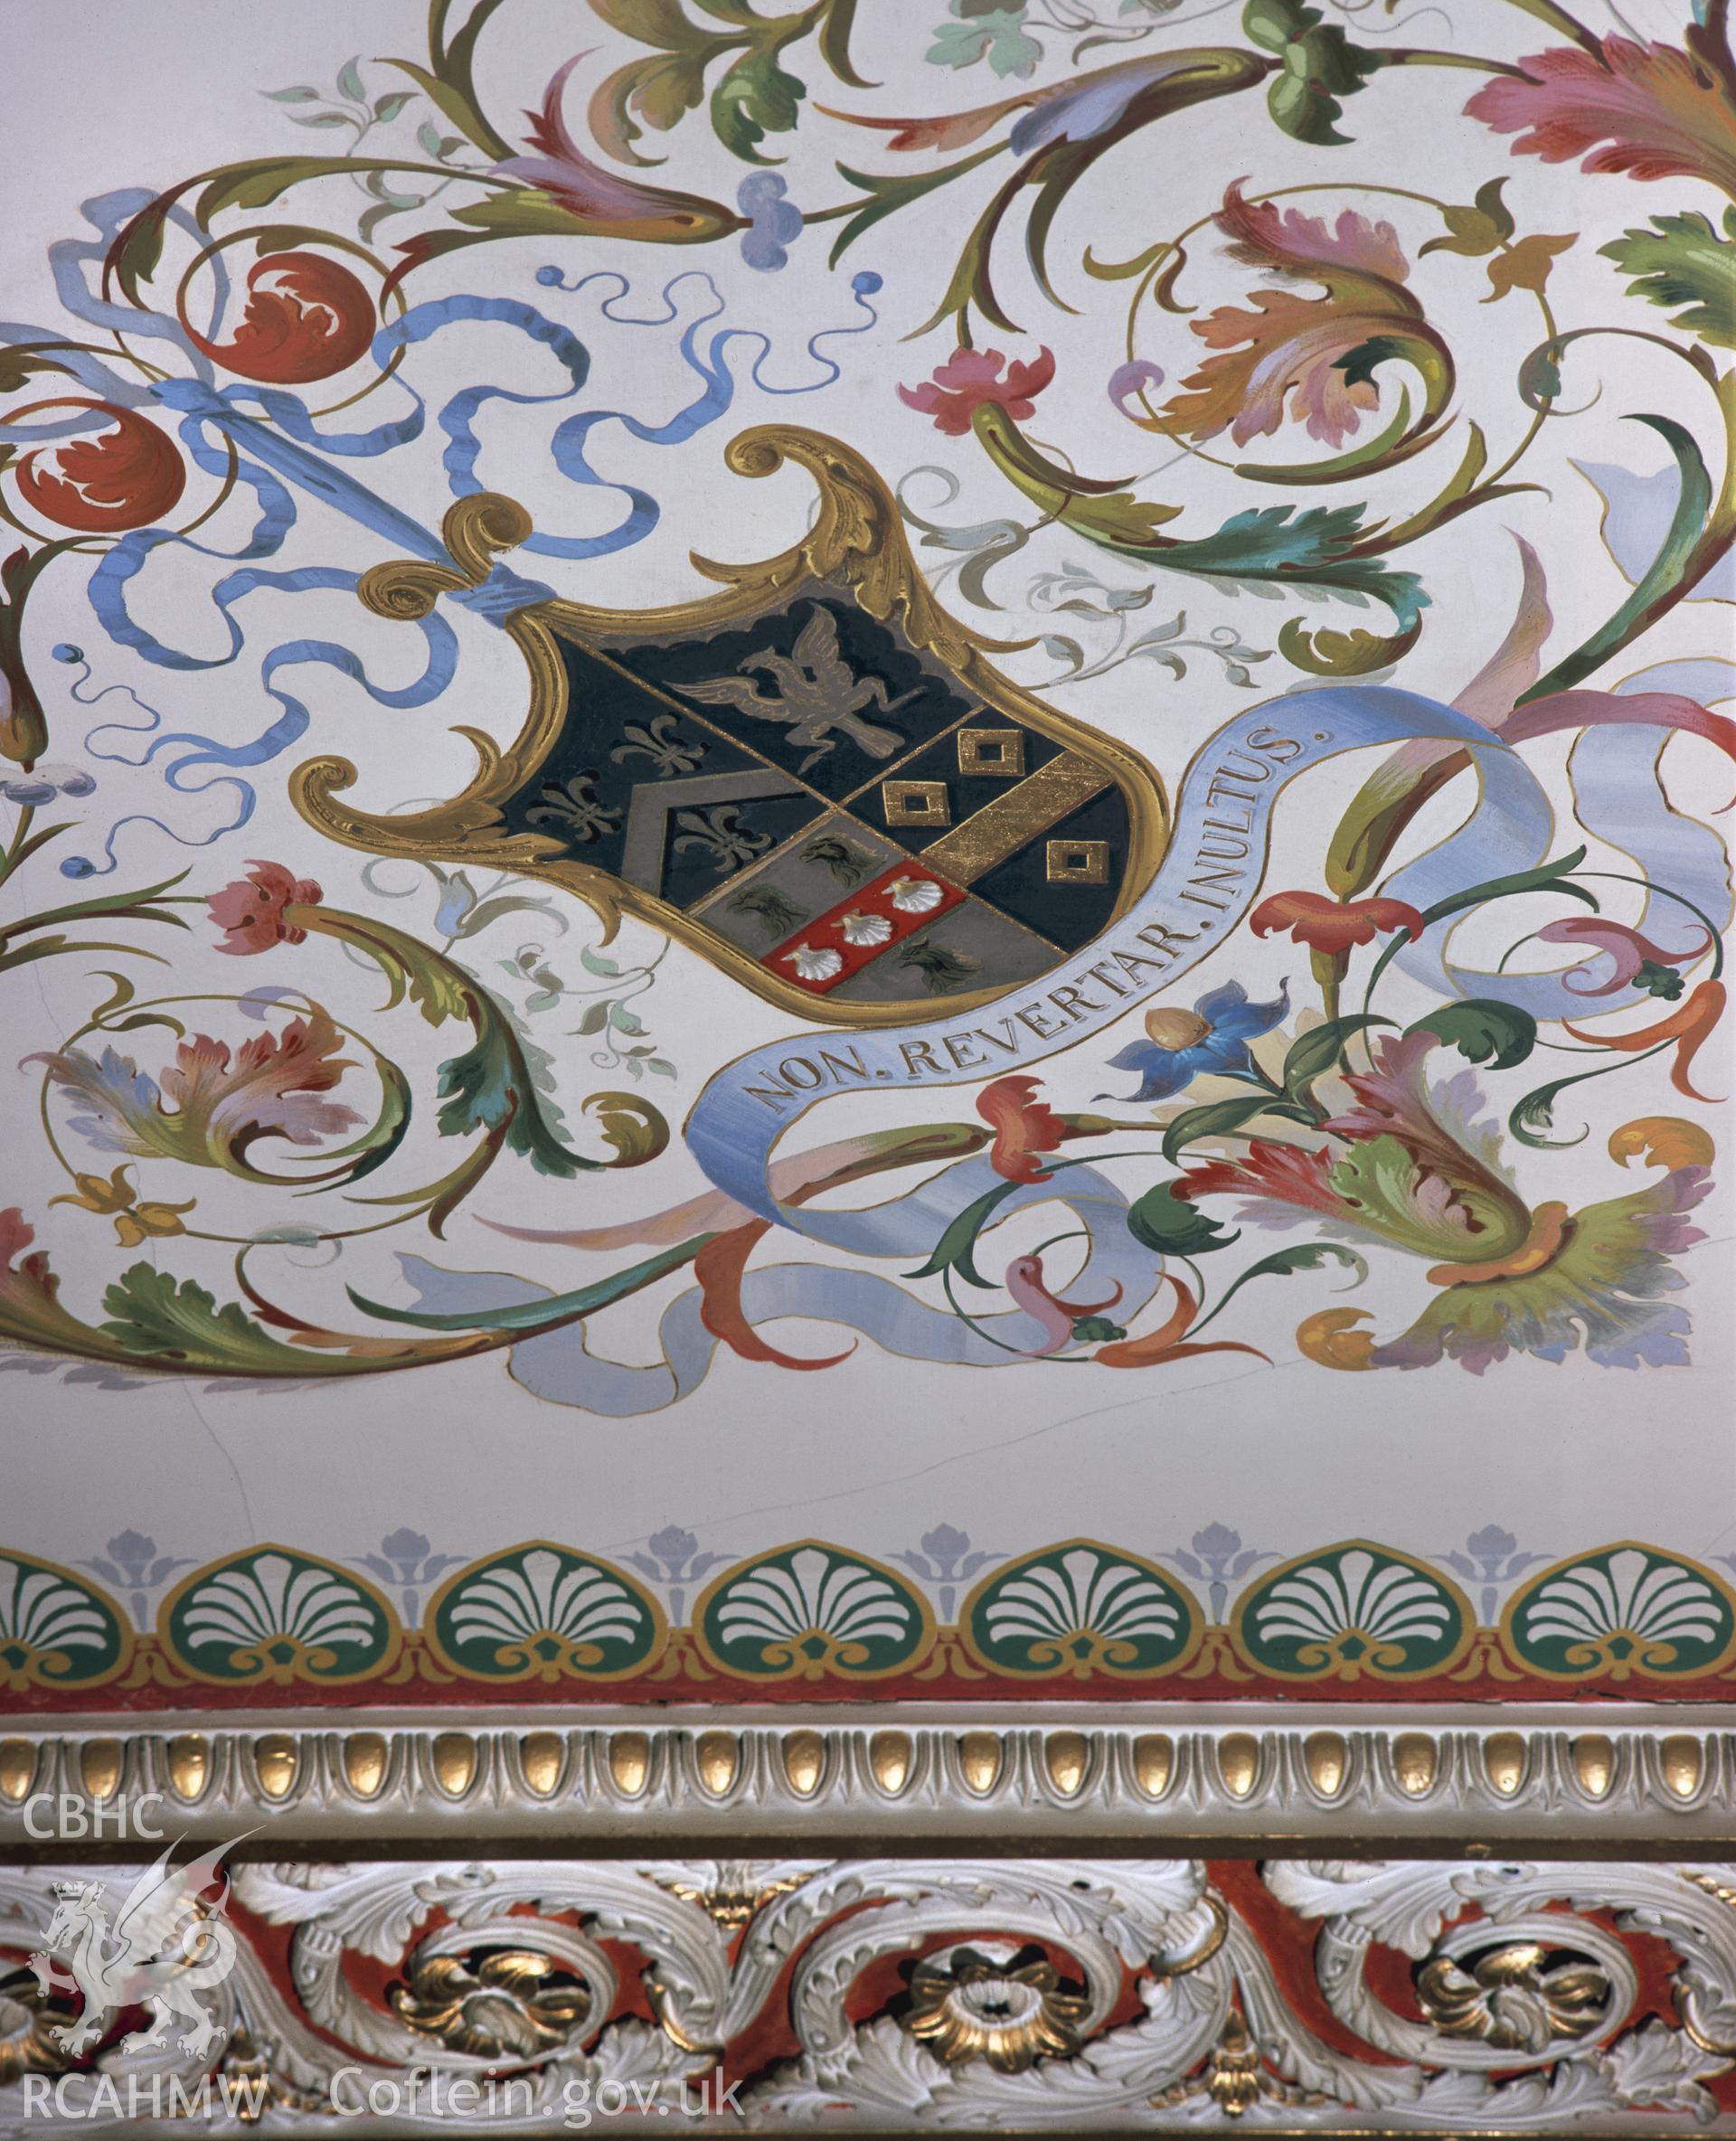 Colour image showing ceiling detail in the library at Trawscoed.